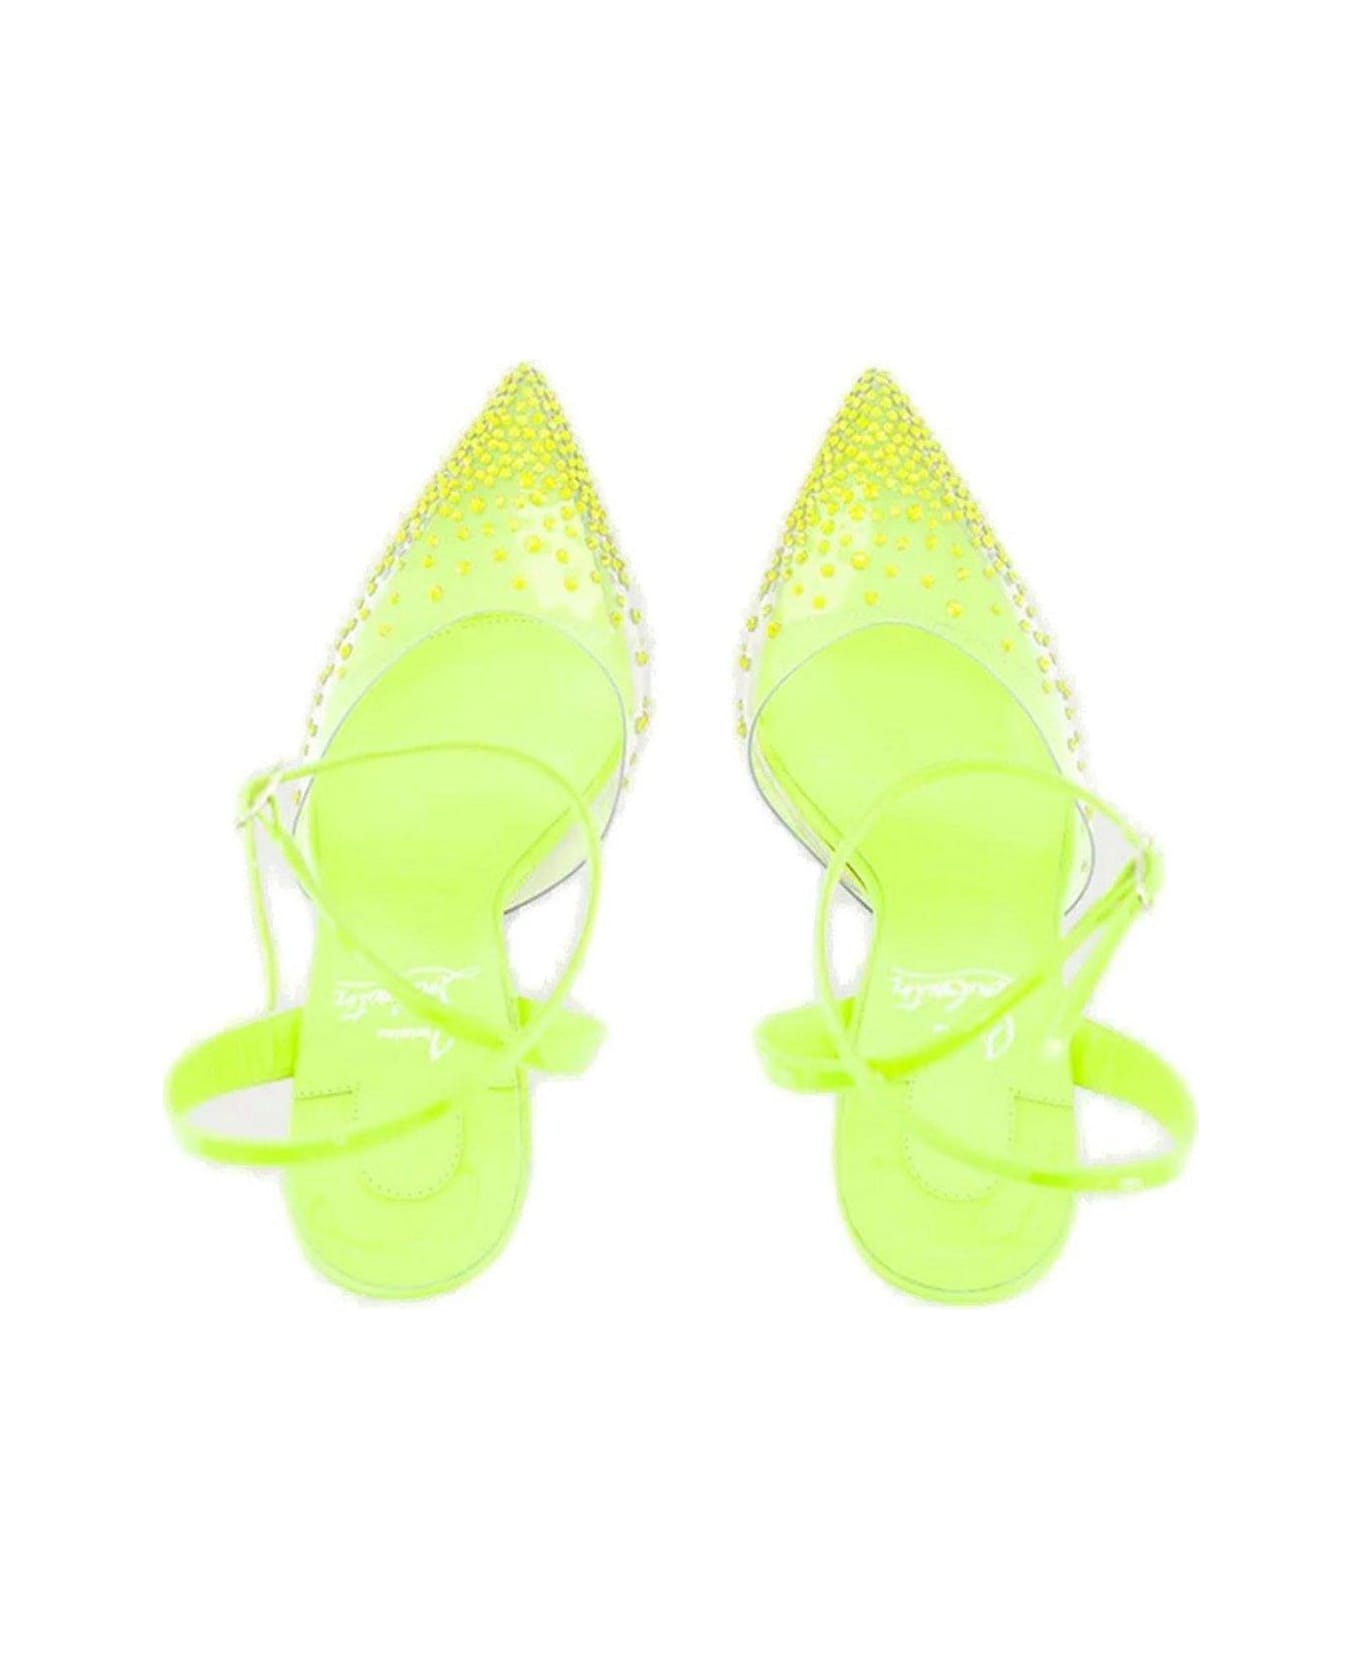 Christian Louboutin Spikaqueen Pointed Toe Pumps - Yellow ハイヒール